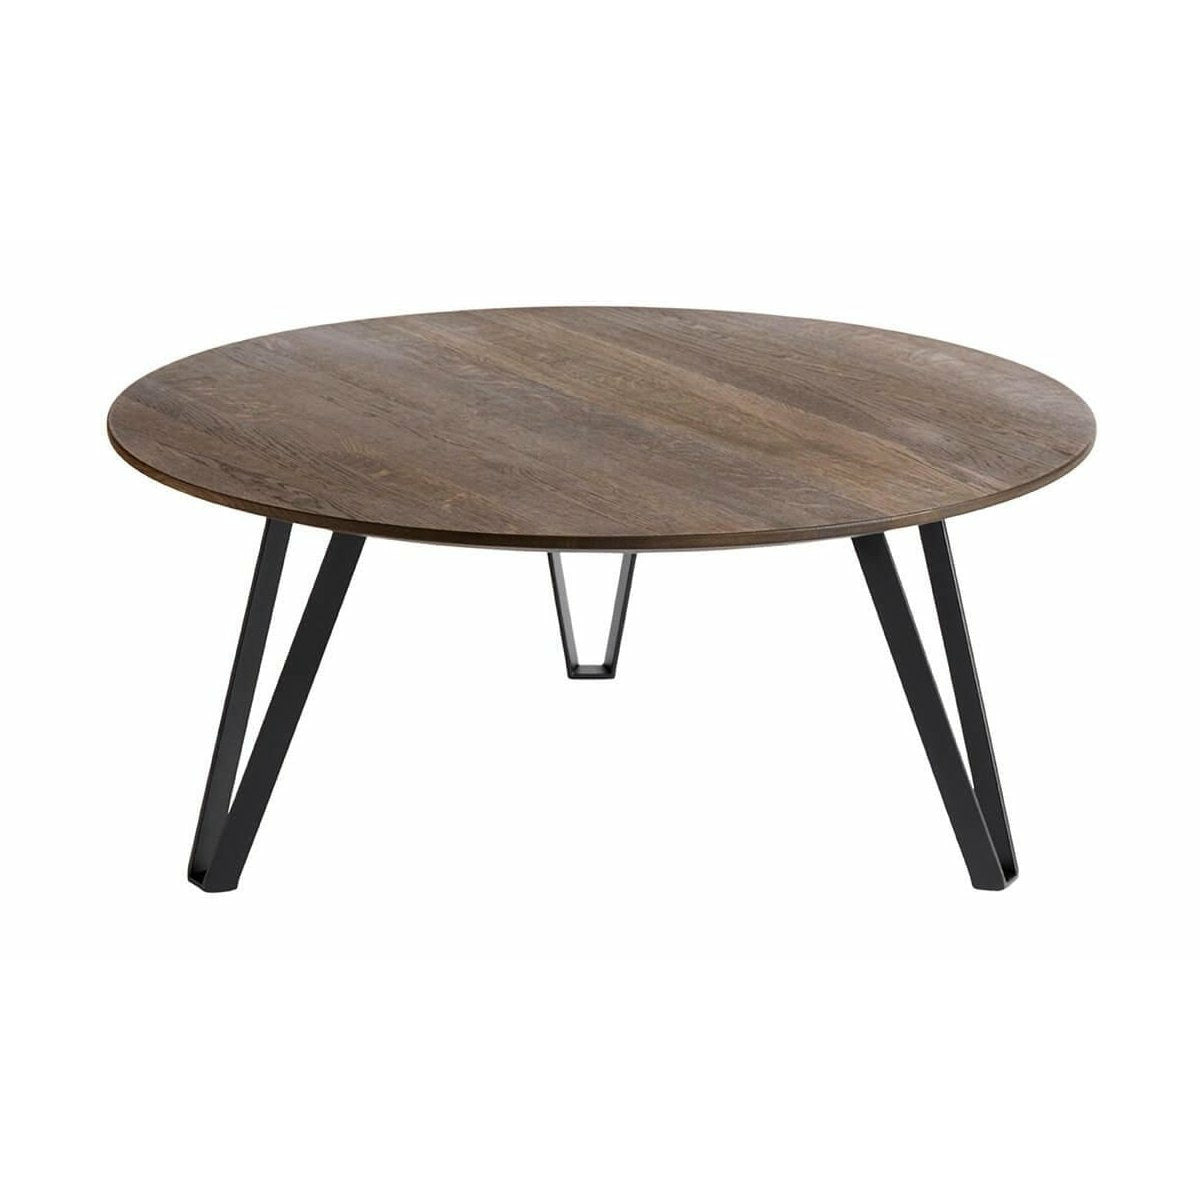 Muubs Space Coffee Table Smoked Oak, ø90cm